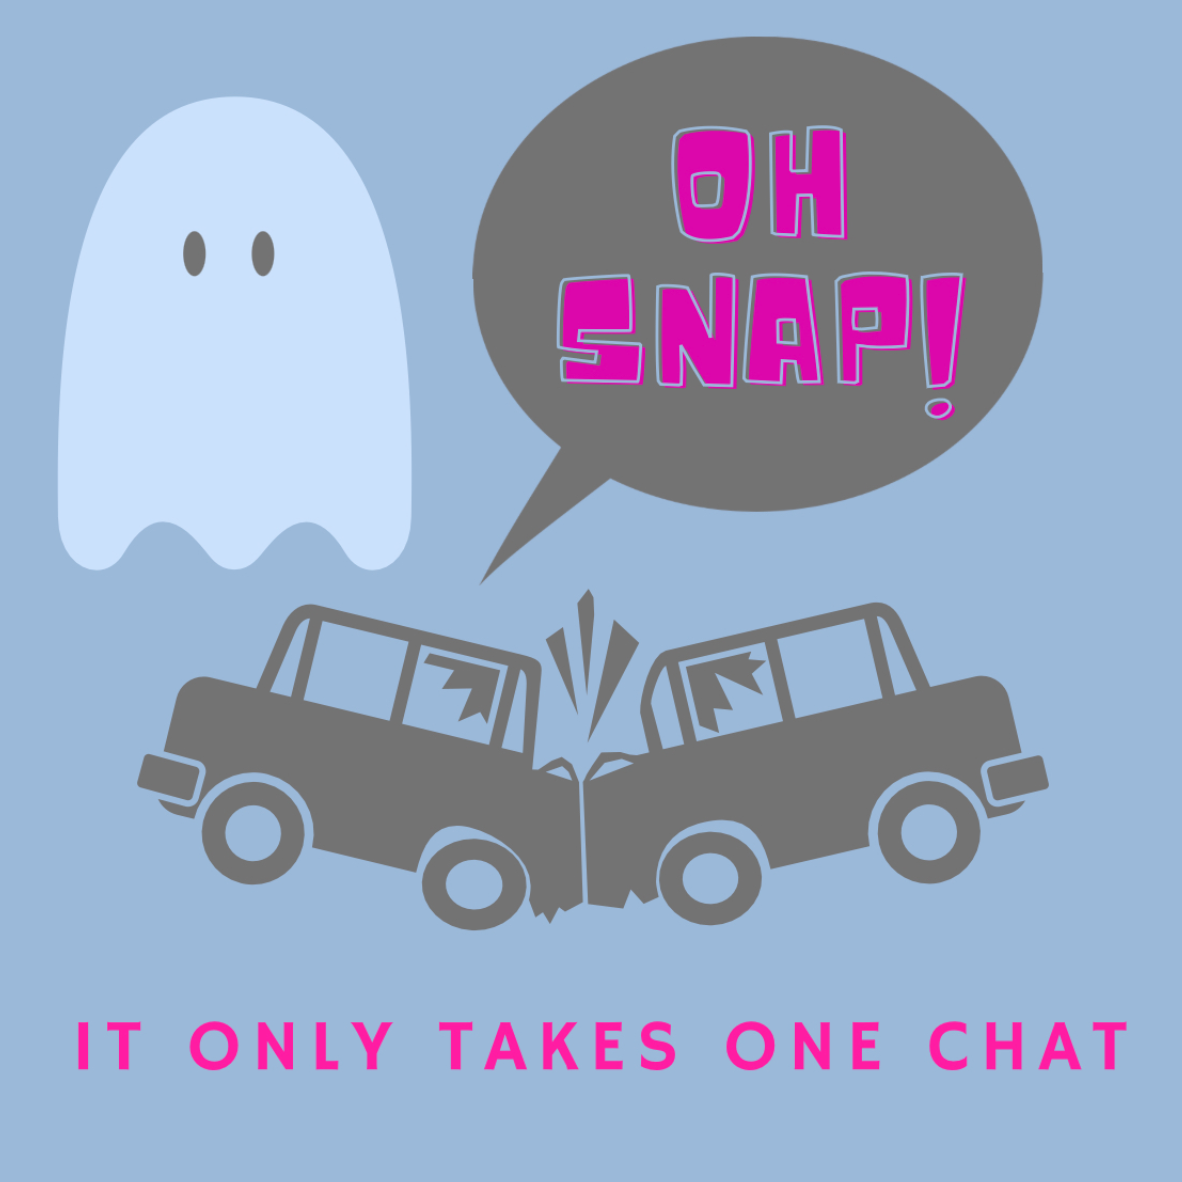 Best graphic Oh Snap! It only takes one chat, by Rylie Steuer. Image courtesy of Michigan Auto Law.